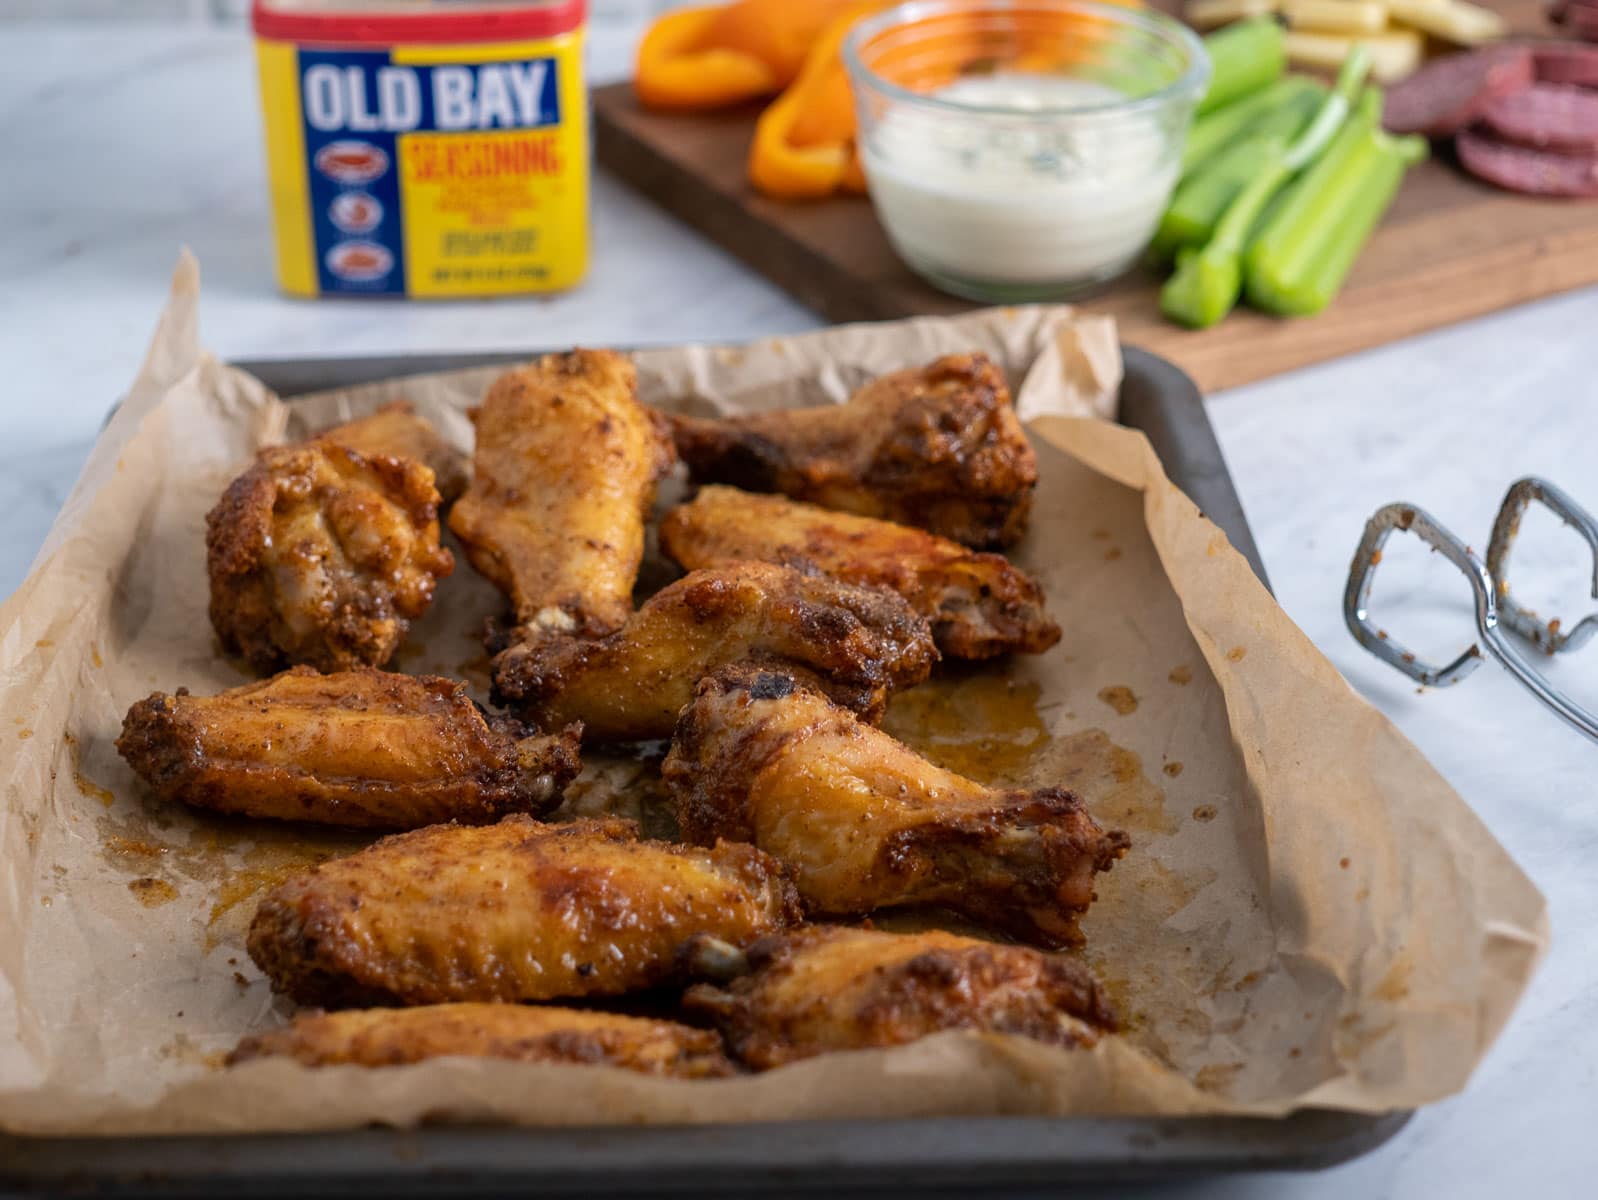 Chicken wings are sizzling on a baking sheet during the finger food frenzy.